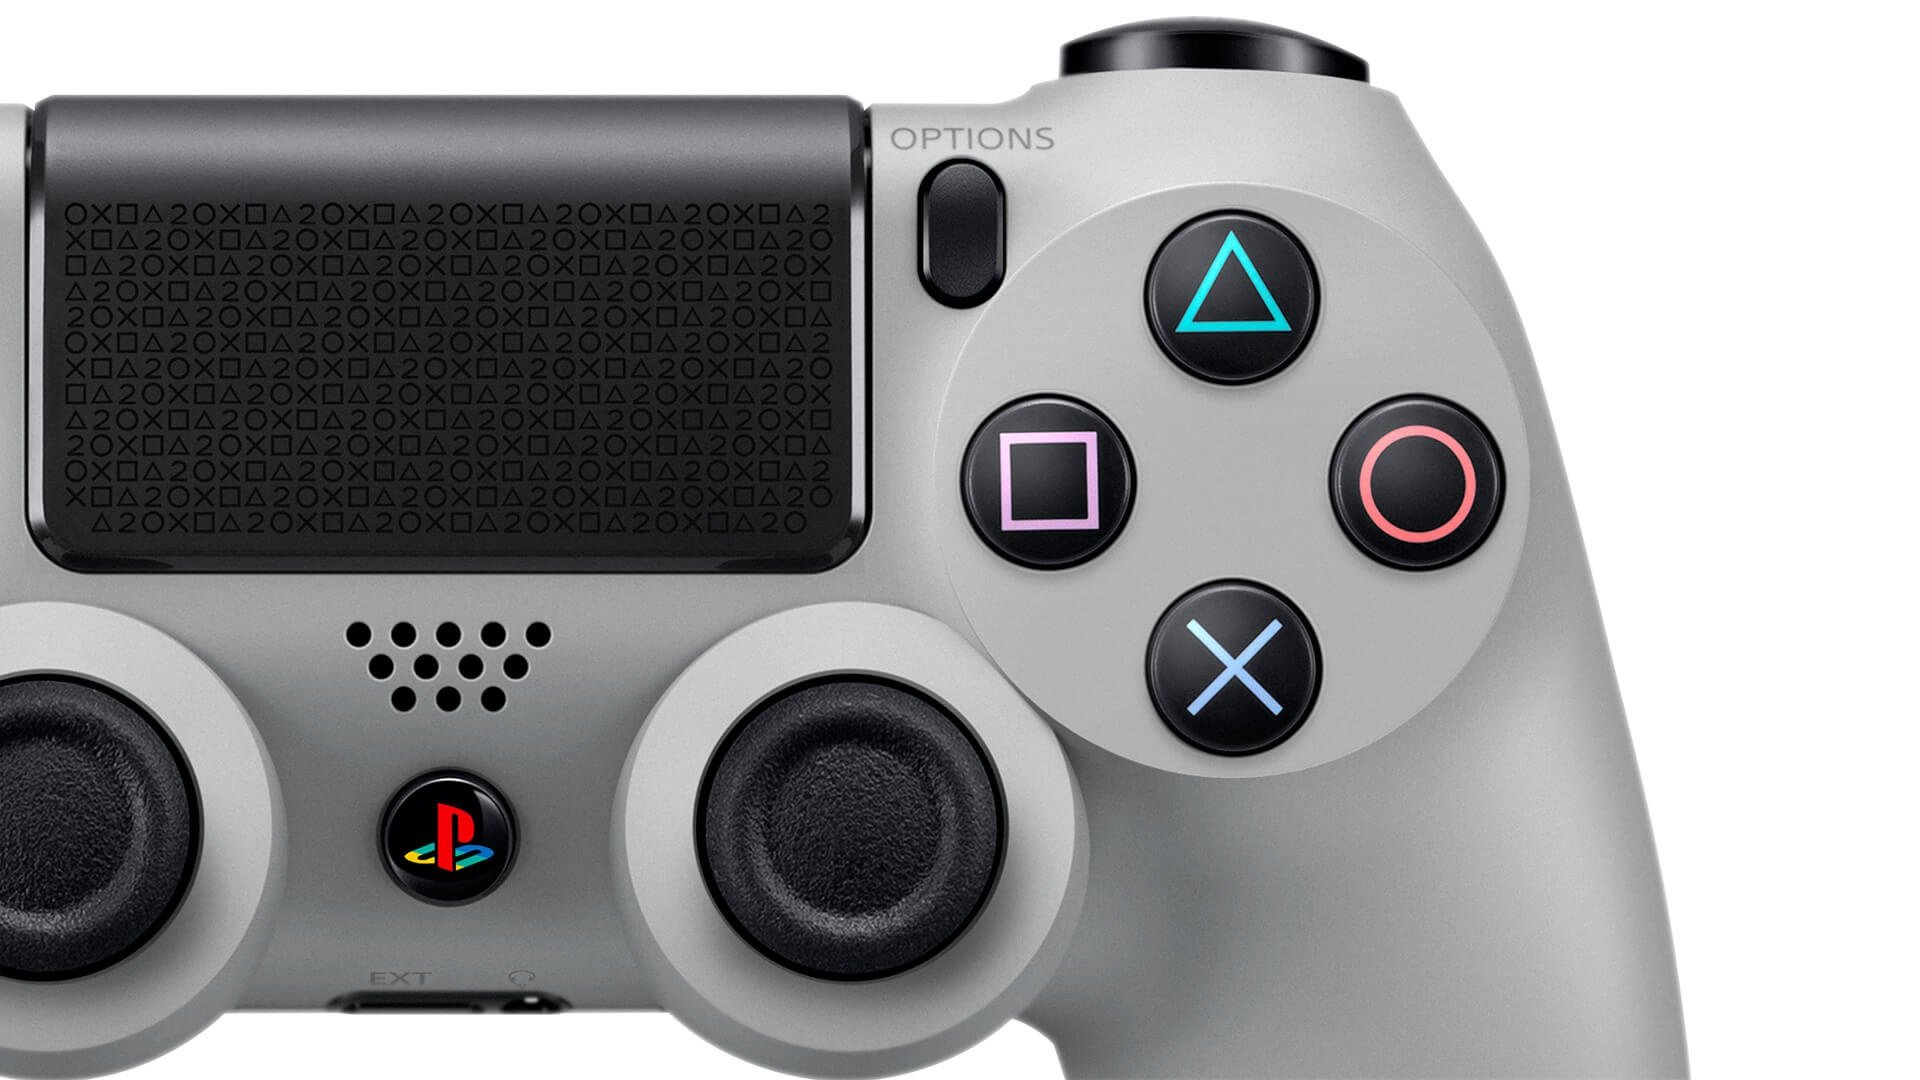 will the ps4 be able to play with ps5